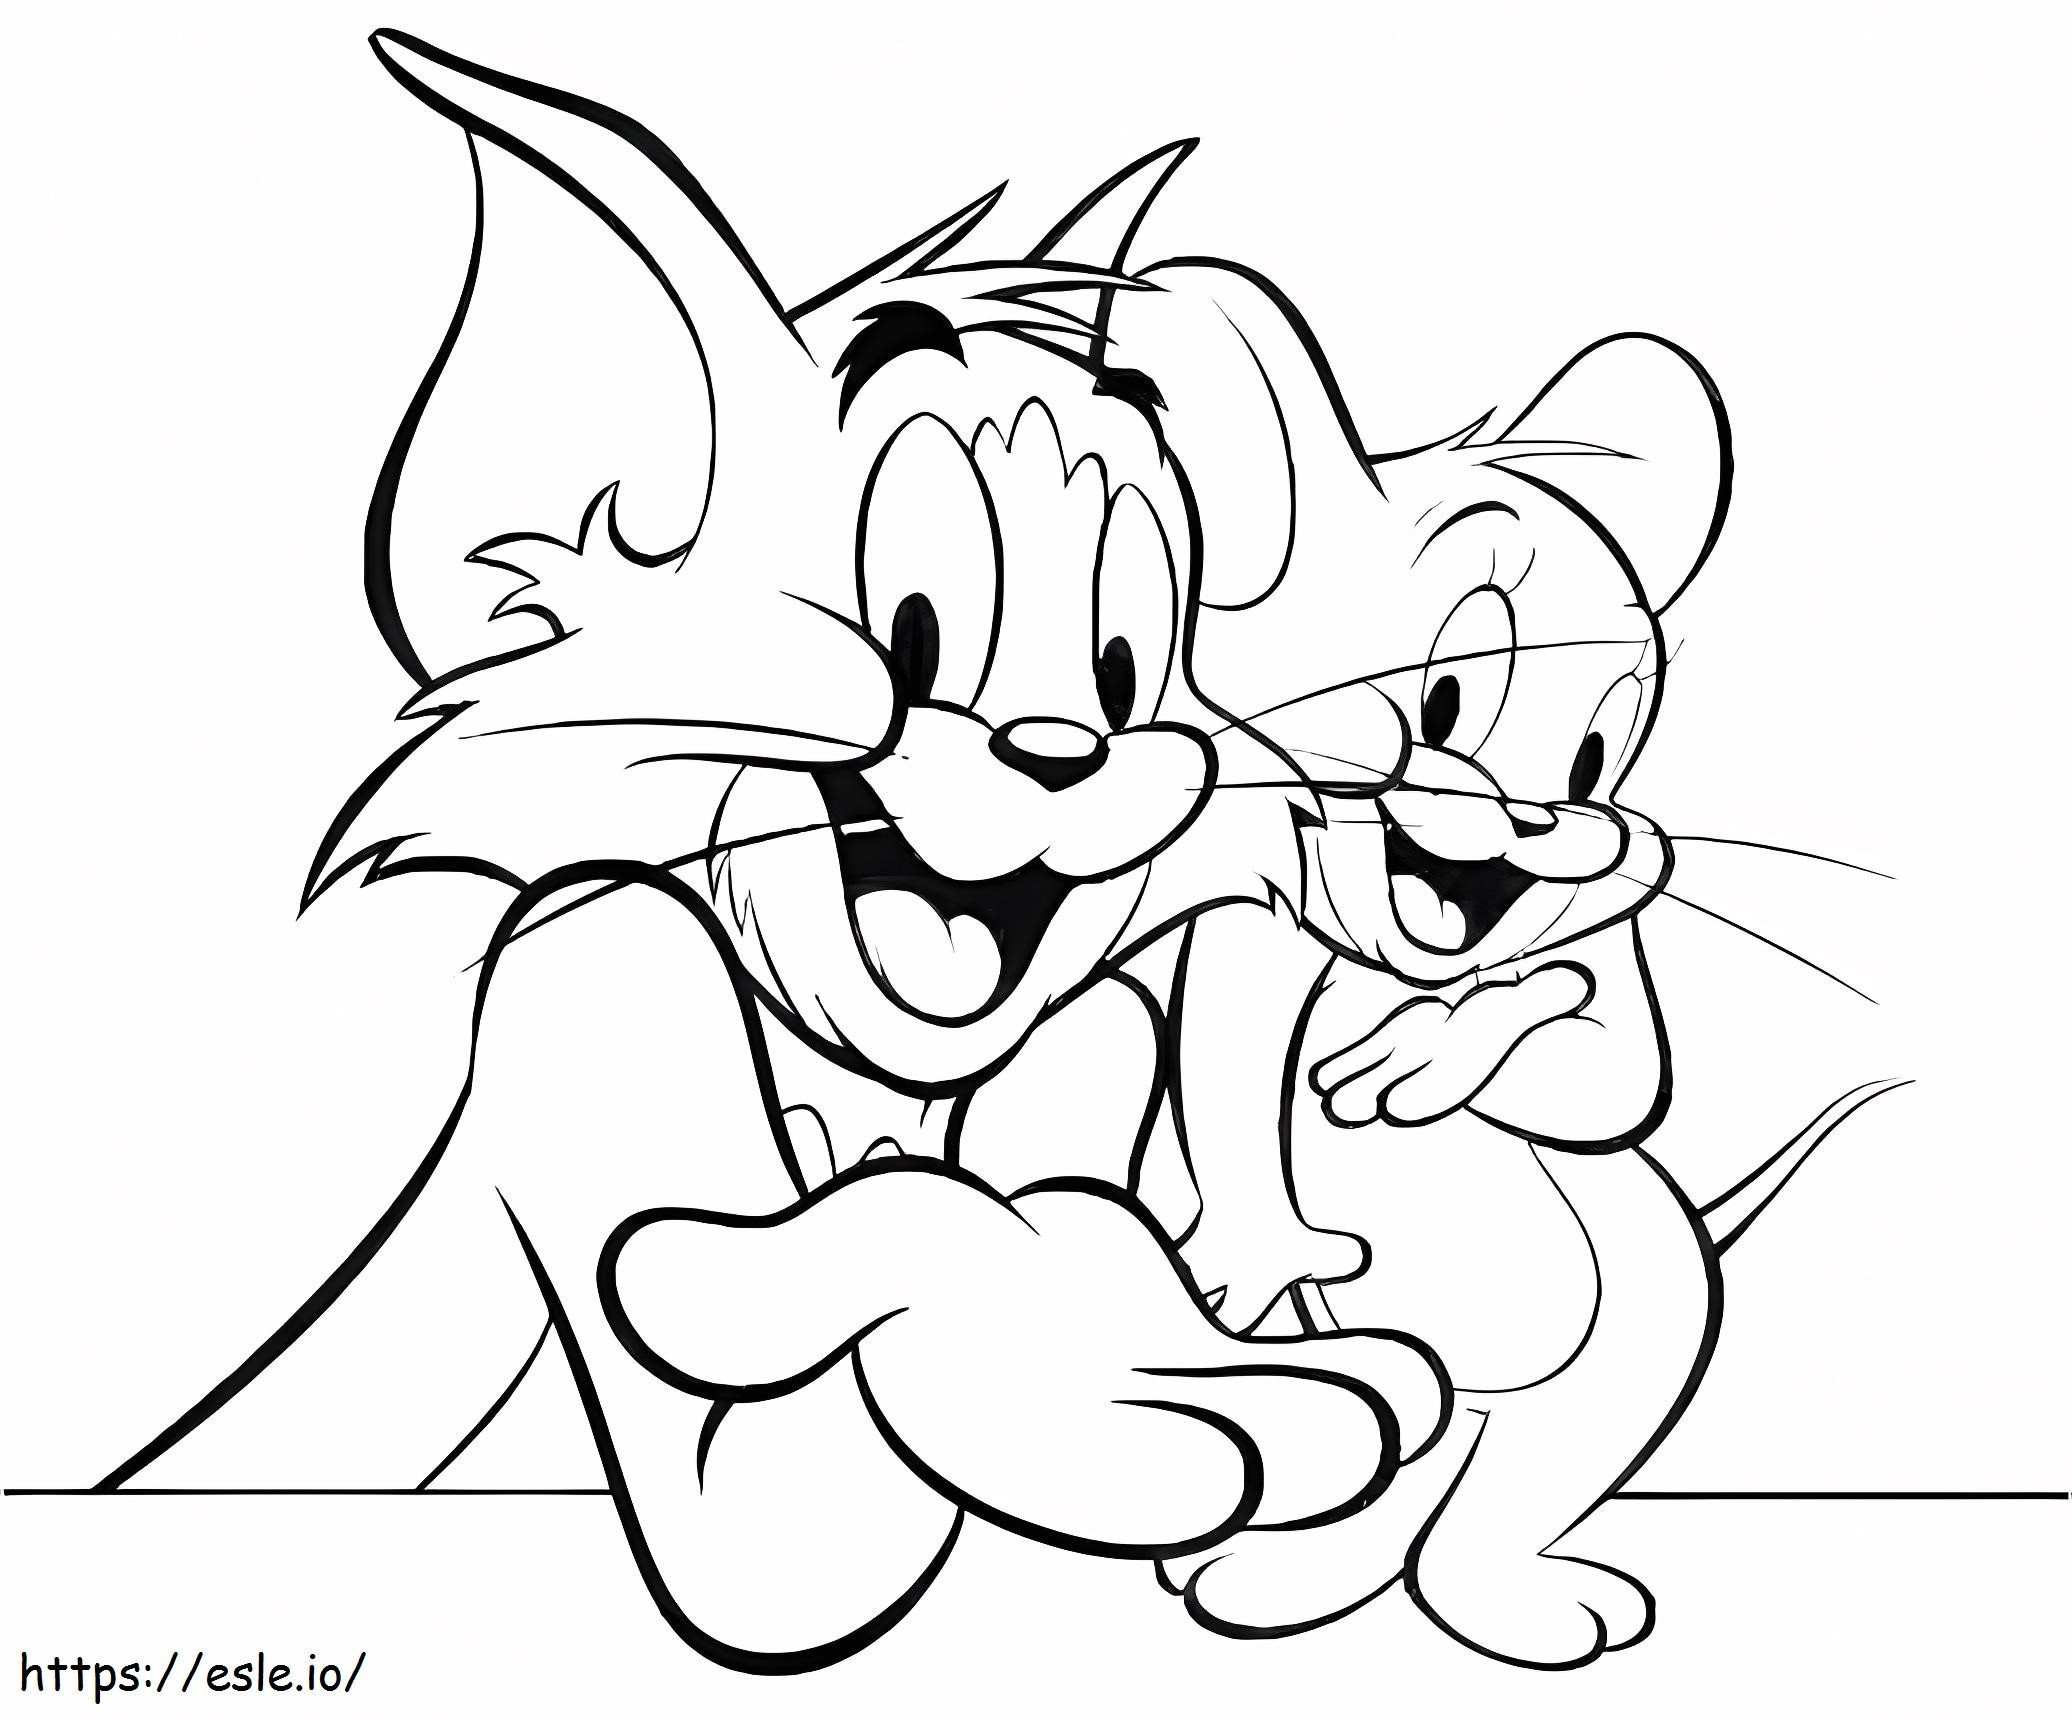 1532423731 Happy Tom N Jerry A4 coloring page